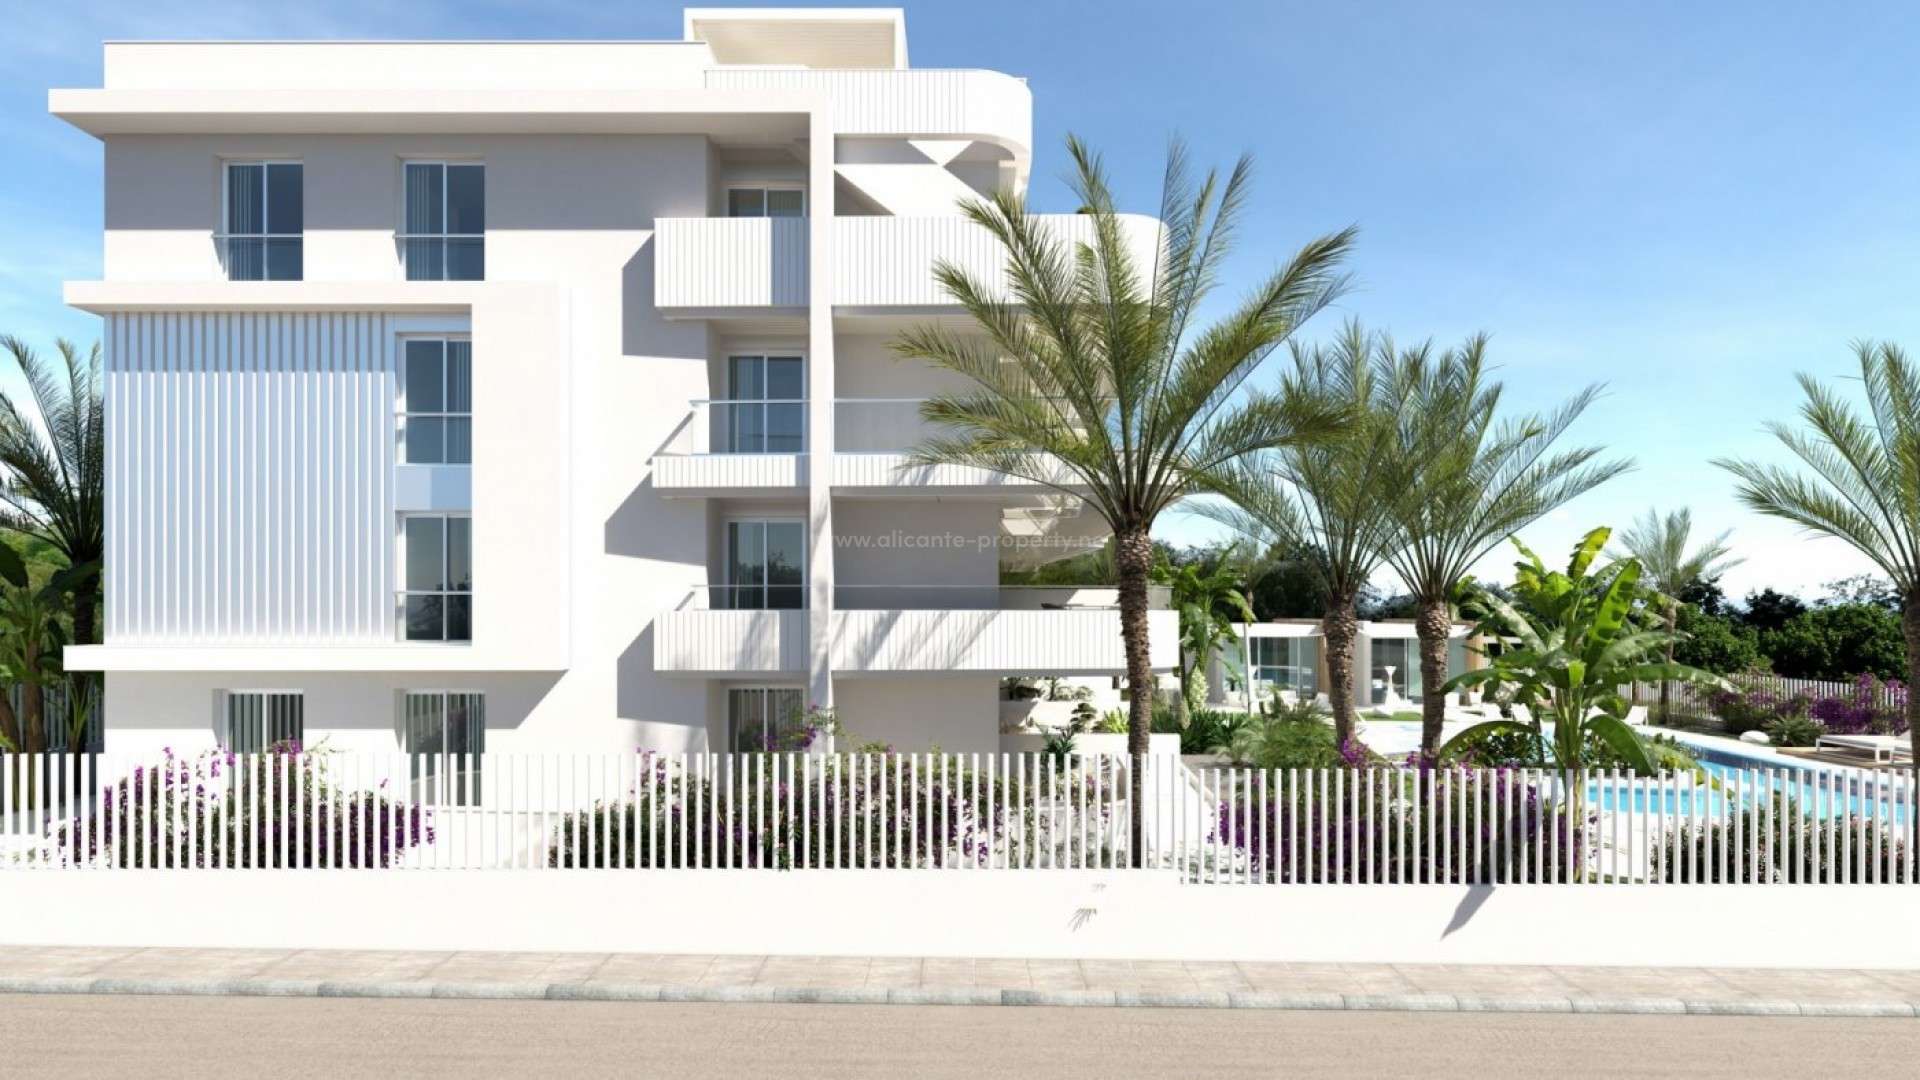 Luxury apartments in Lomas de Cabo Roig, 2/3 bedrooms, 2 bathrooms, large swimming pool (including children's area and hot tub) and garden and play area